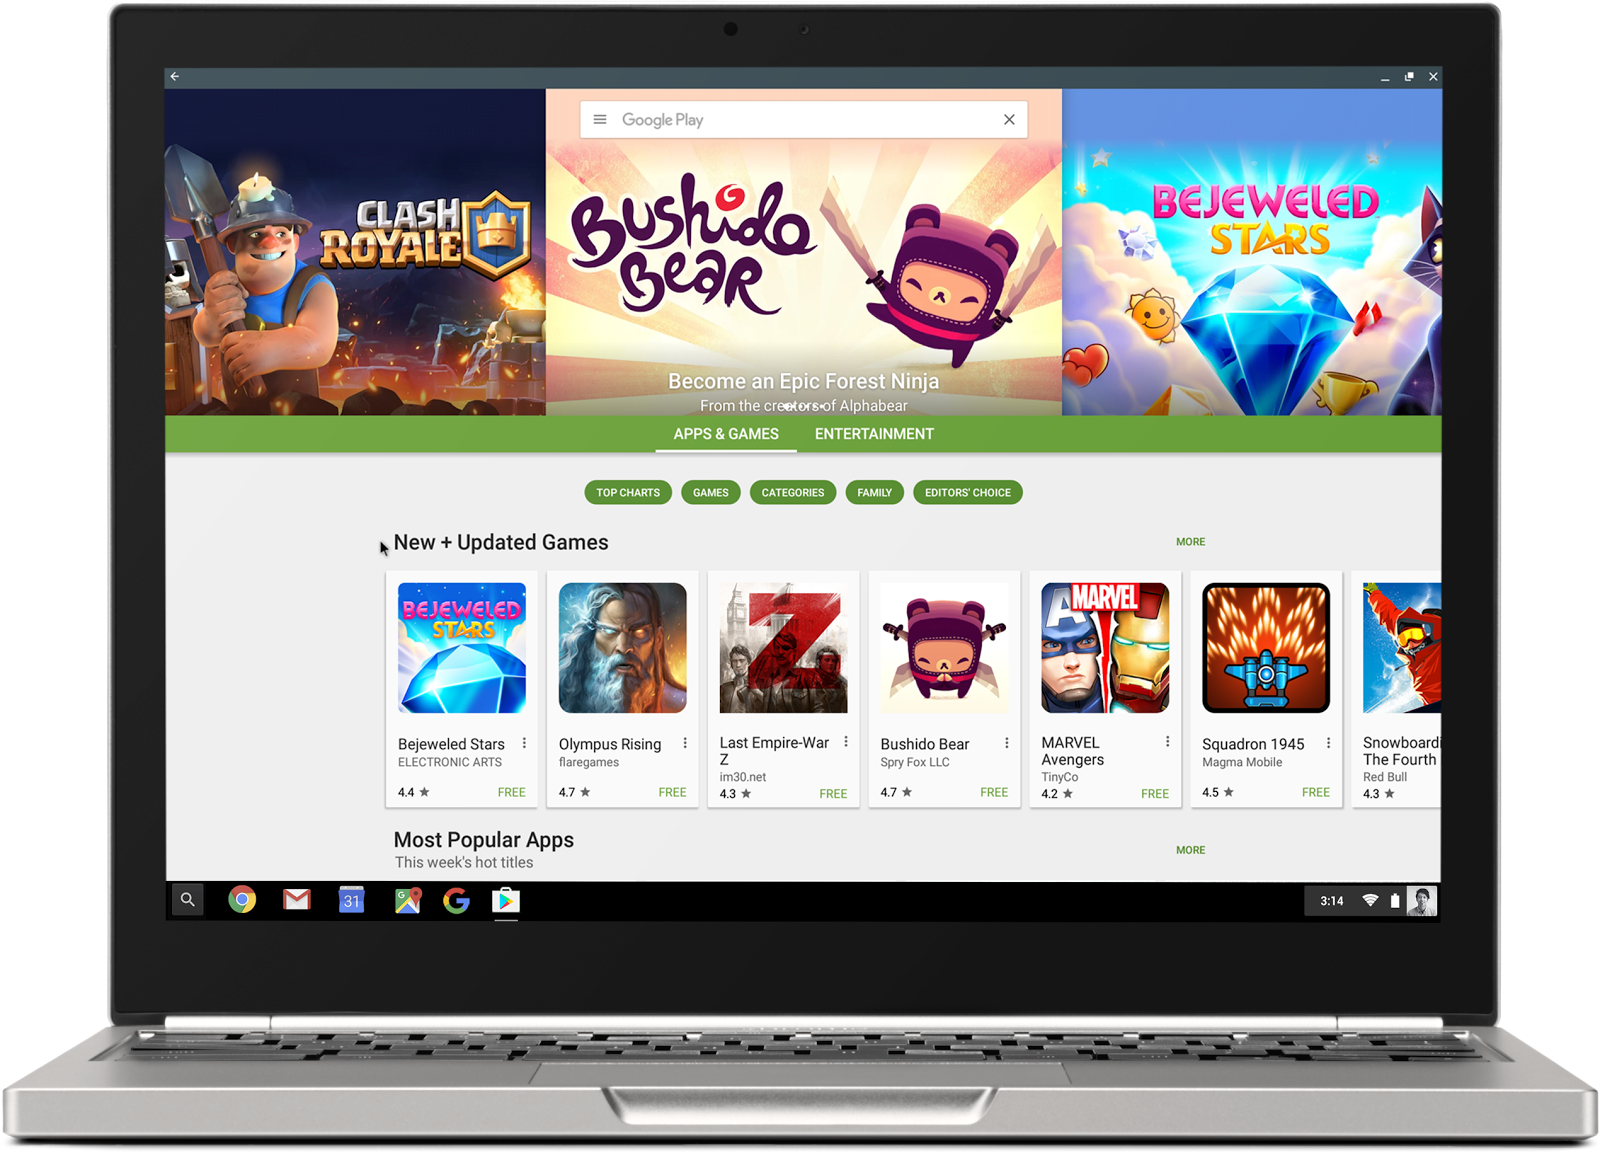 Android apps are coming to Chromebooks, and it’s going to be huge